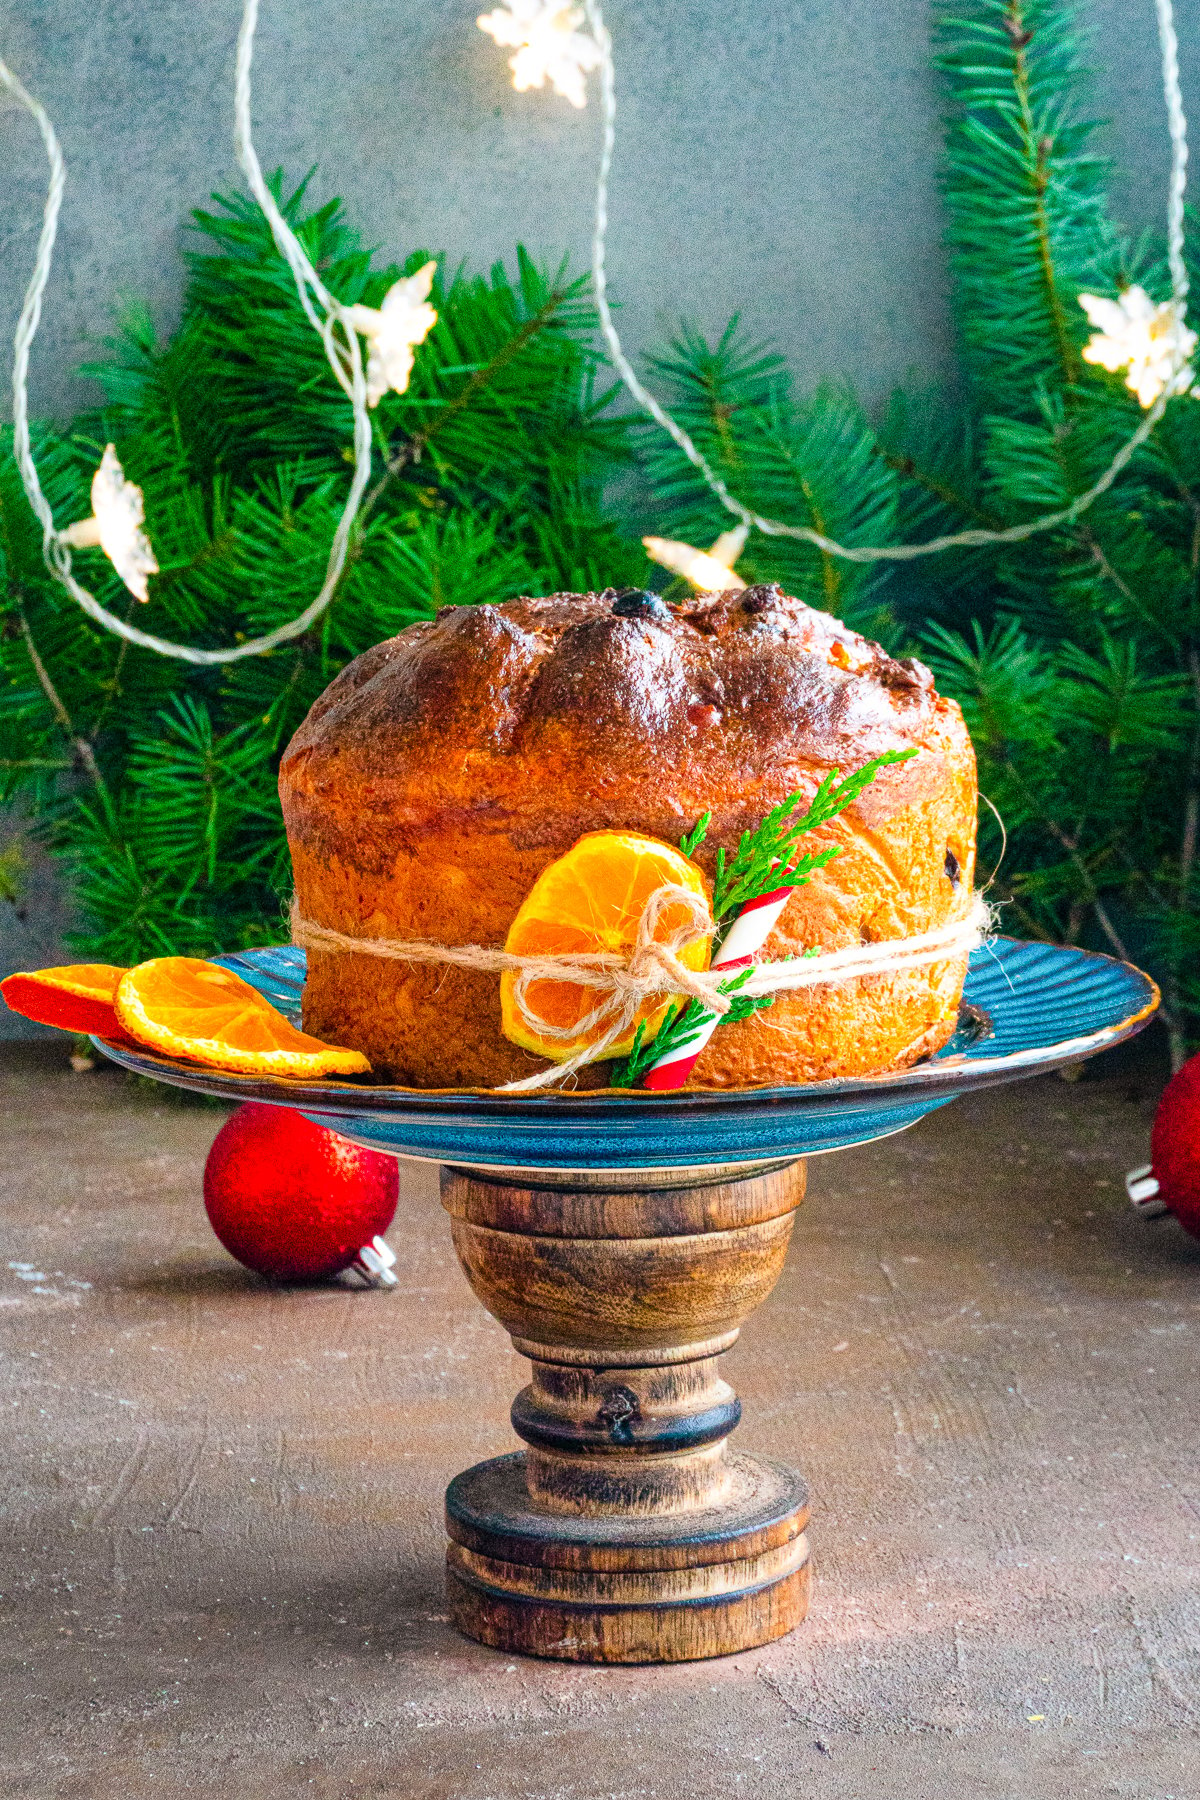 Panettone Recipe on serving stand with oranges and a tie around it.